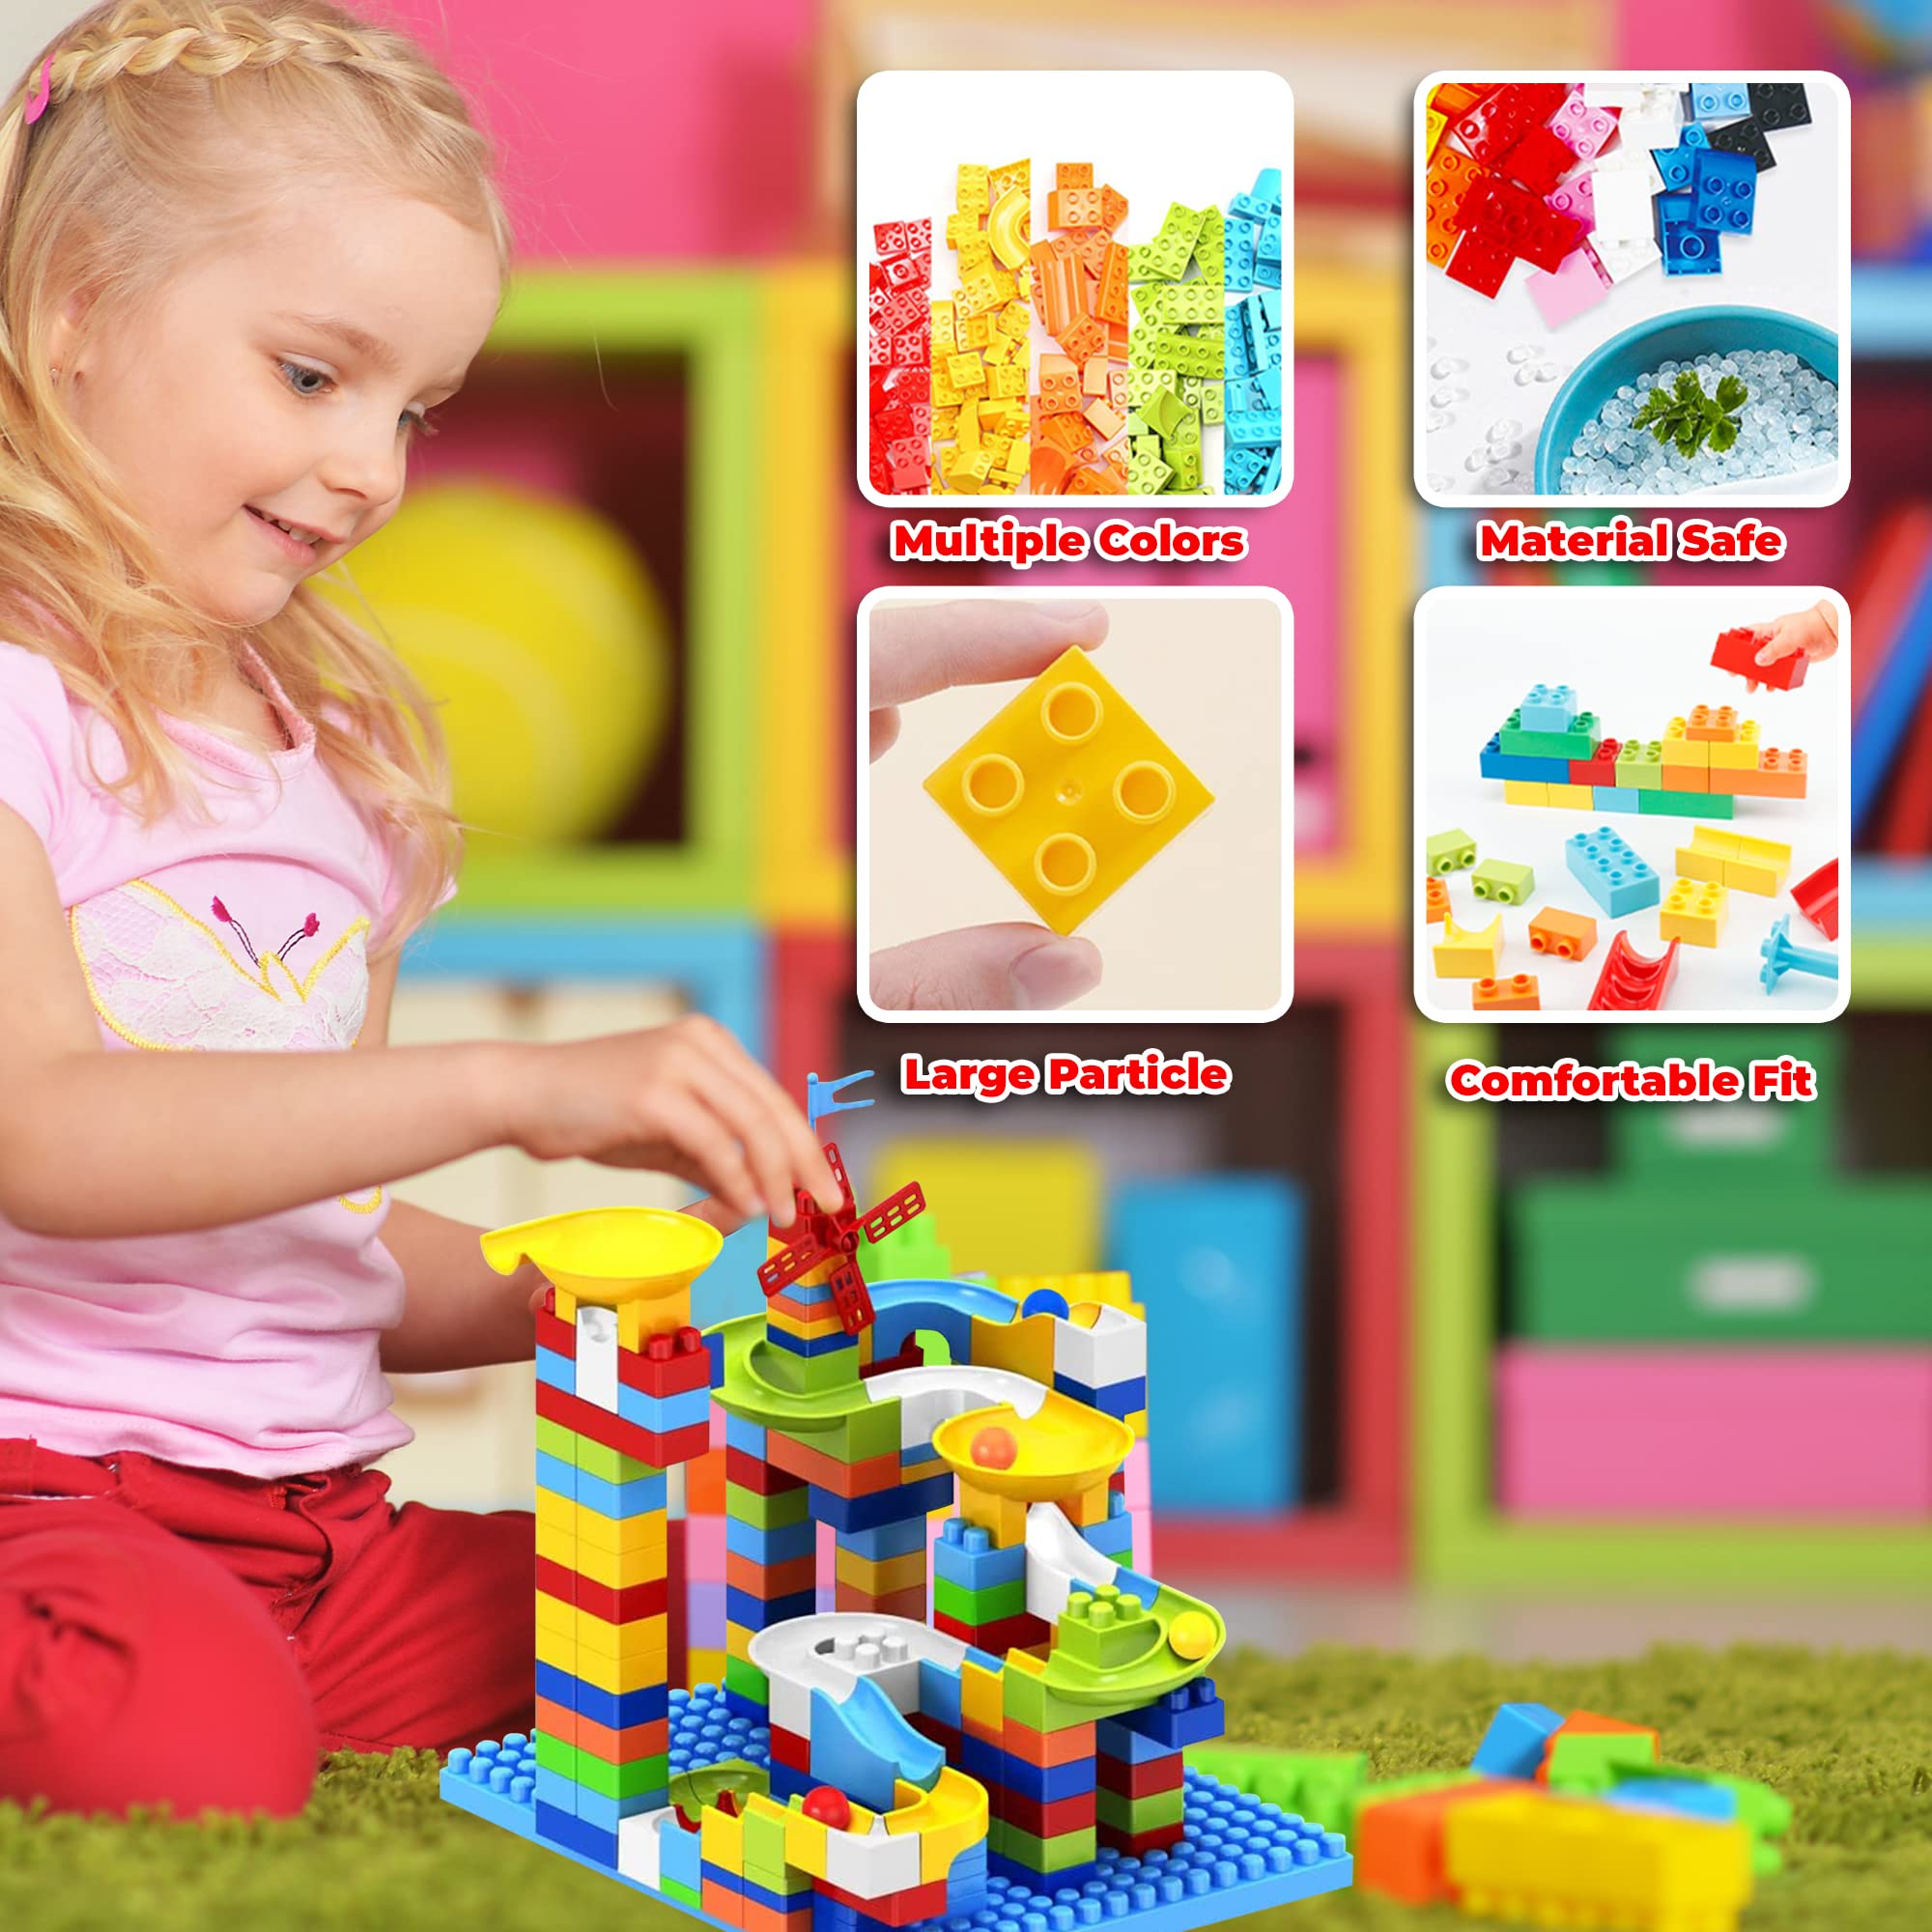 STEM Building Blocks DIY Toy for Kids, Educational Toddlers Toddler Toy Kit, Constructions Toys for 3 4 5 6 7 8 Years Age Boys and Girls - Creativity Kids Toys